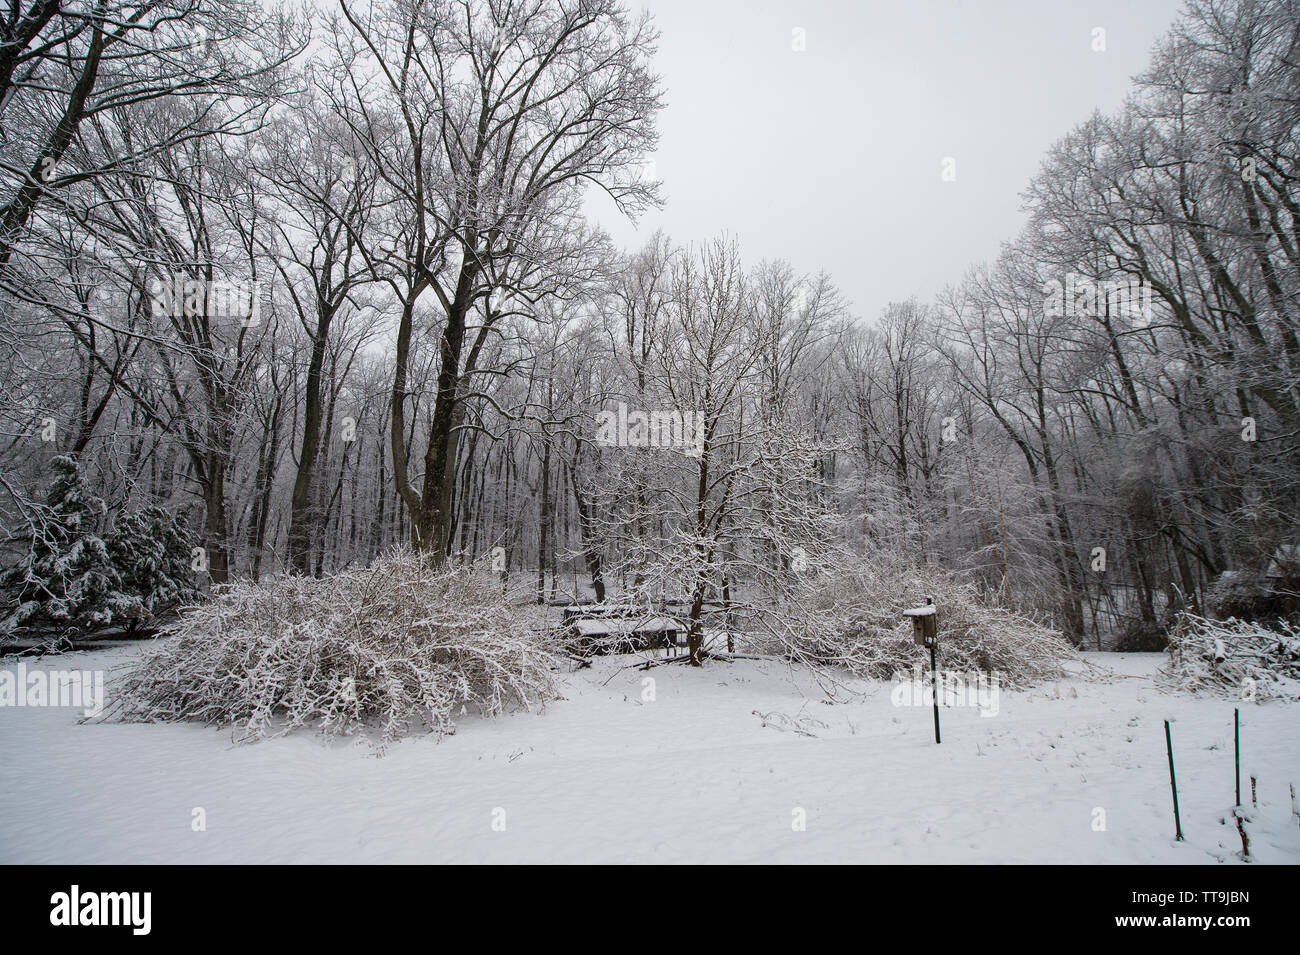 UNITED STATES: MARCH 20, 2015: A late season snow storm on the first day of spring in the Blueridge Mountains of Virginia laid down about four inches Stock Photo